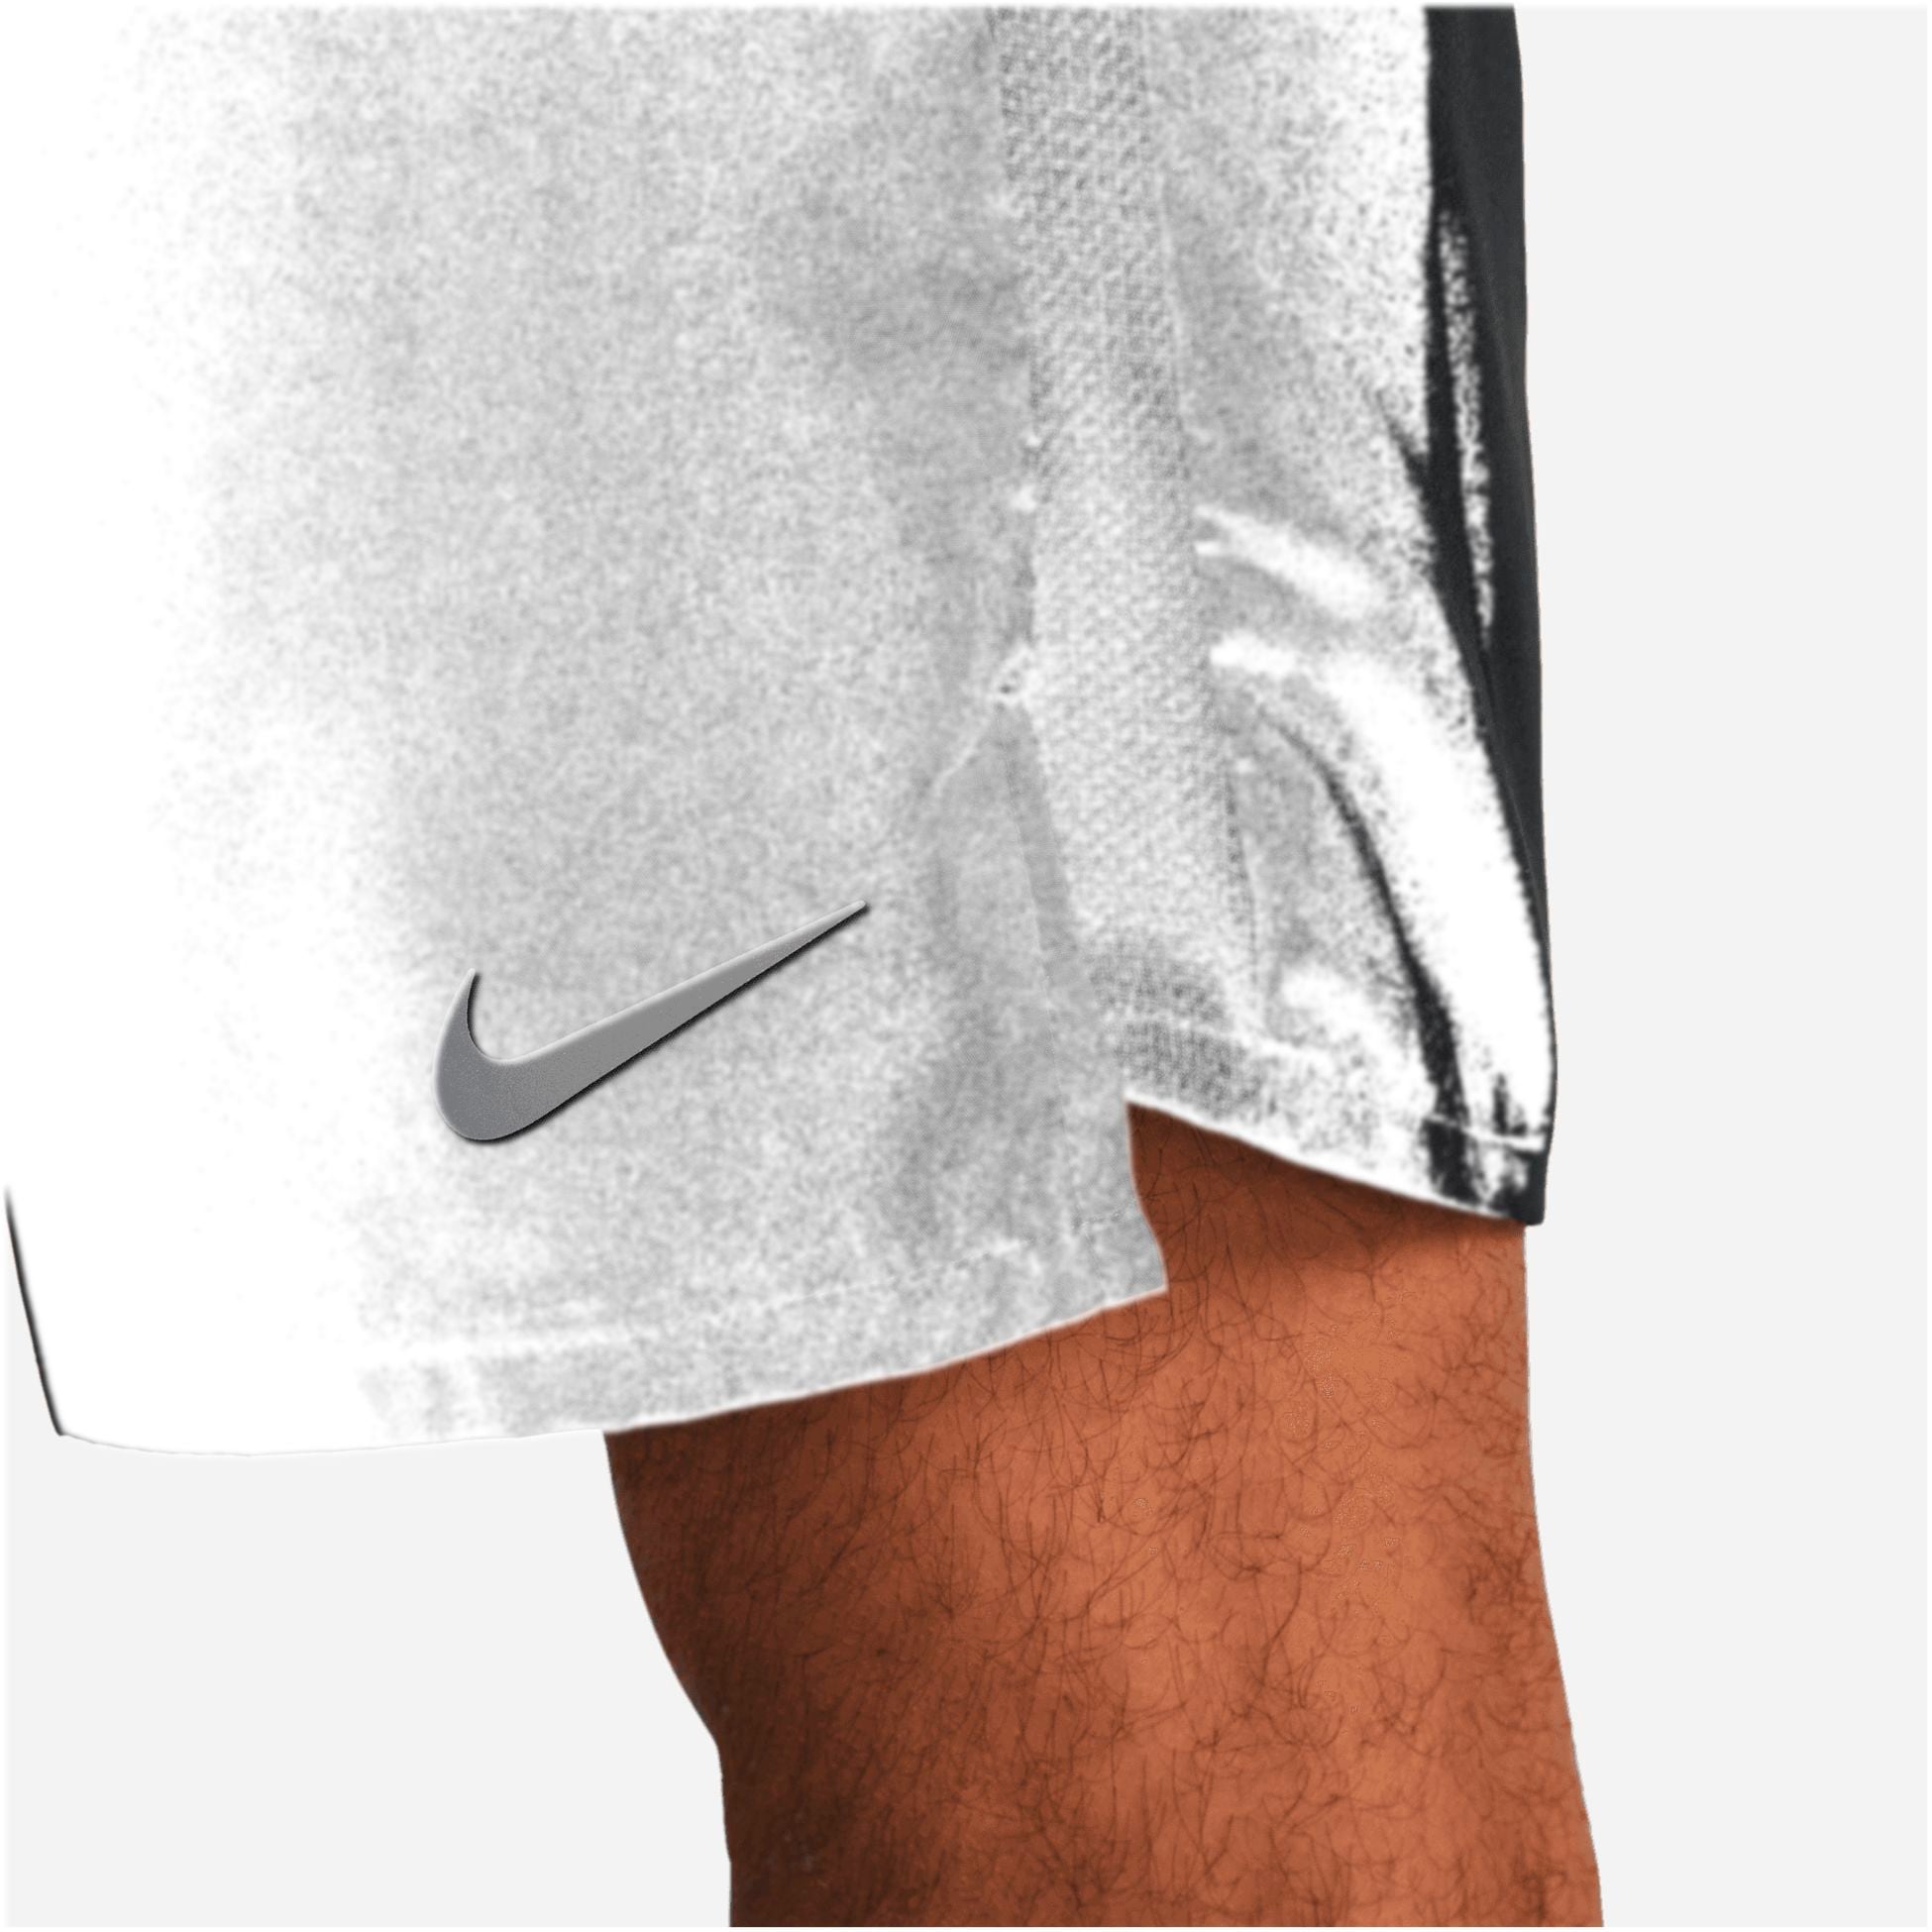 NIKE, M CHALLENGER 7" 2IN1 SHORTS